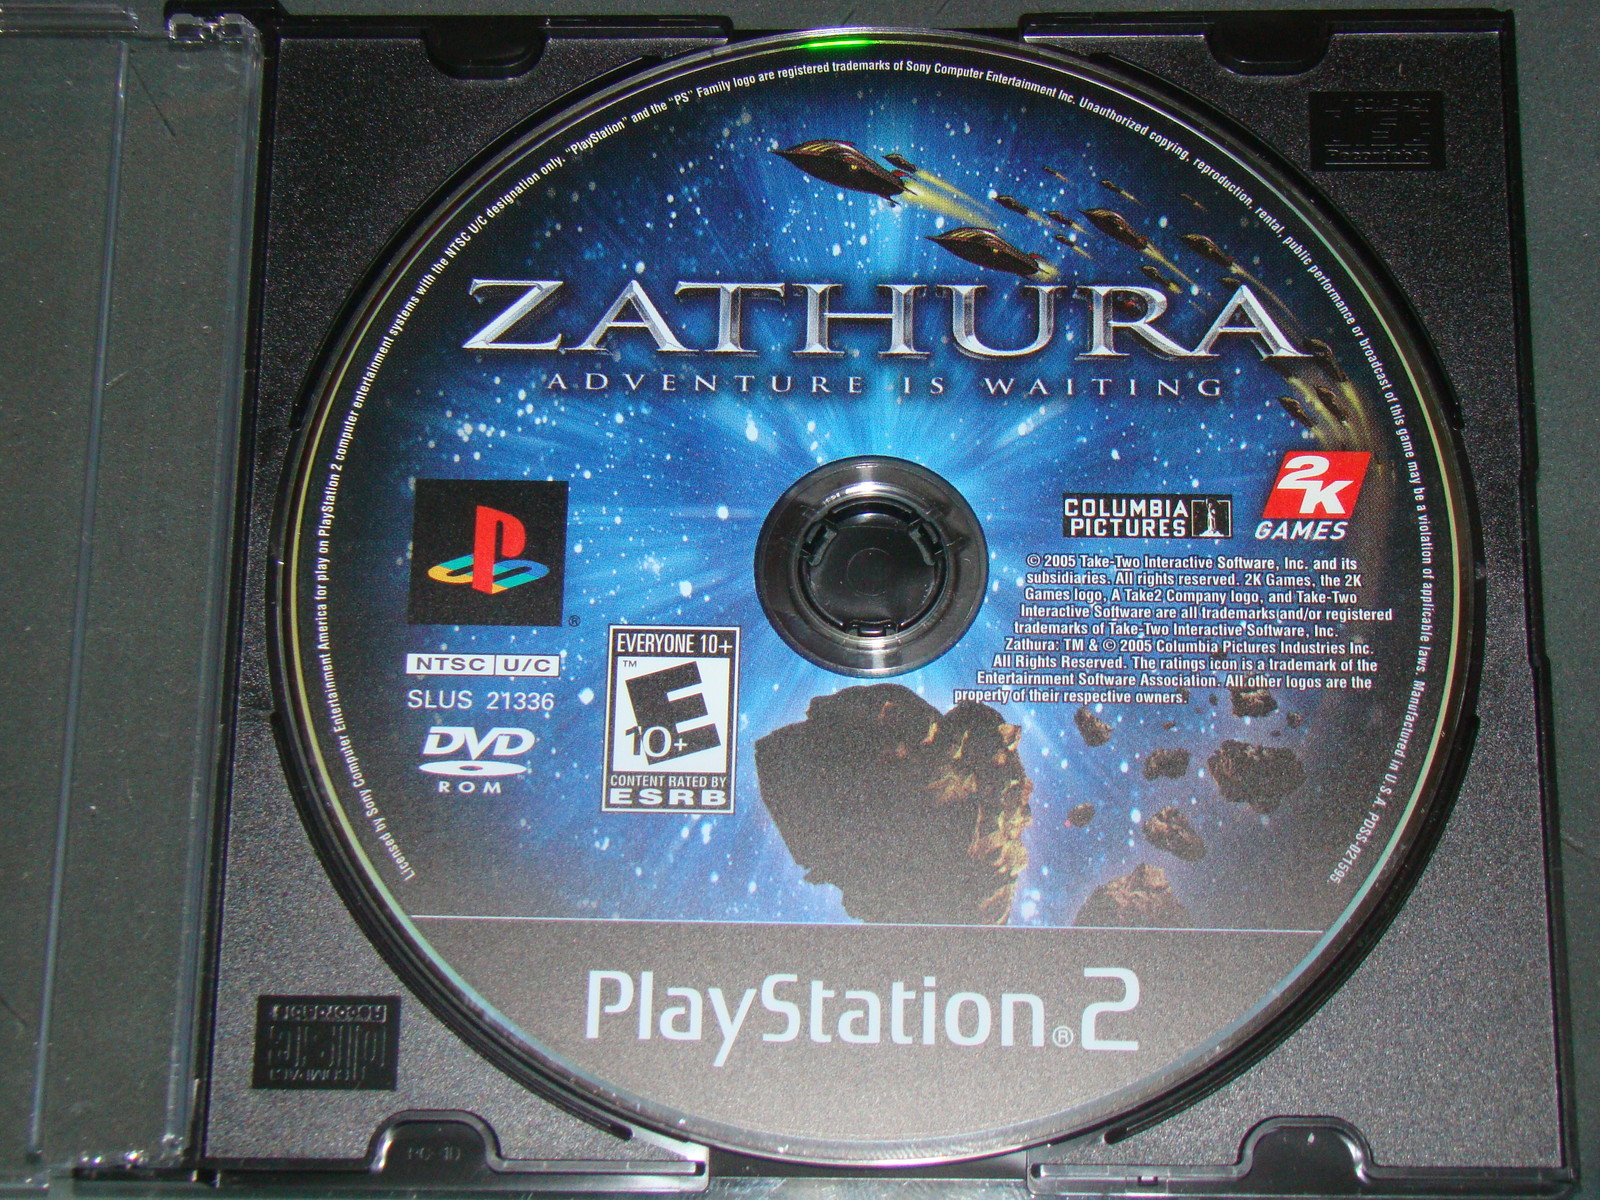 Playstation 2 - Zathura Adventure Is Waiting and similar items